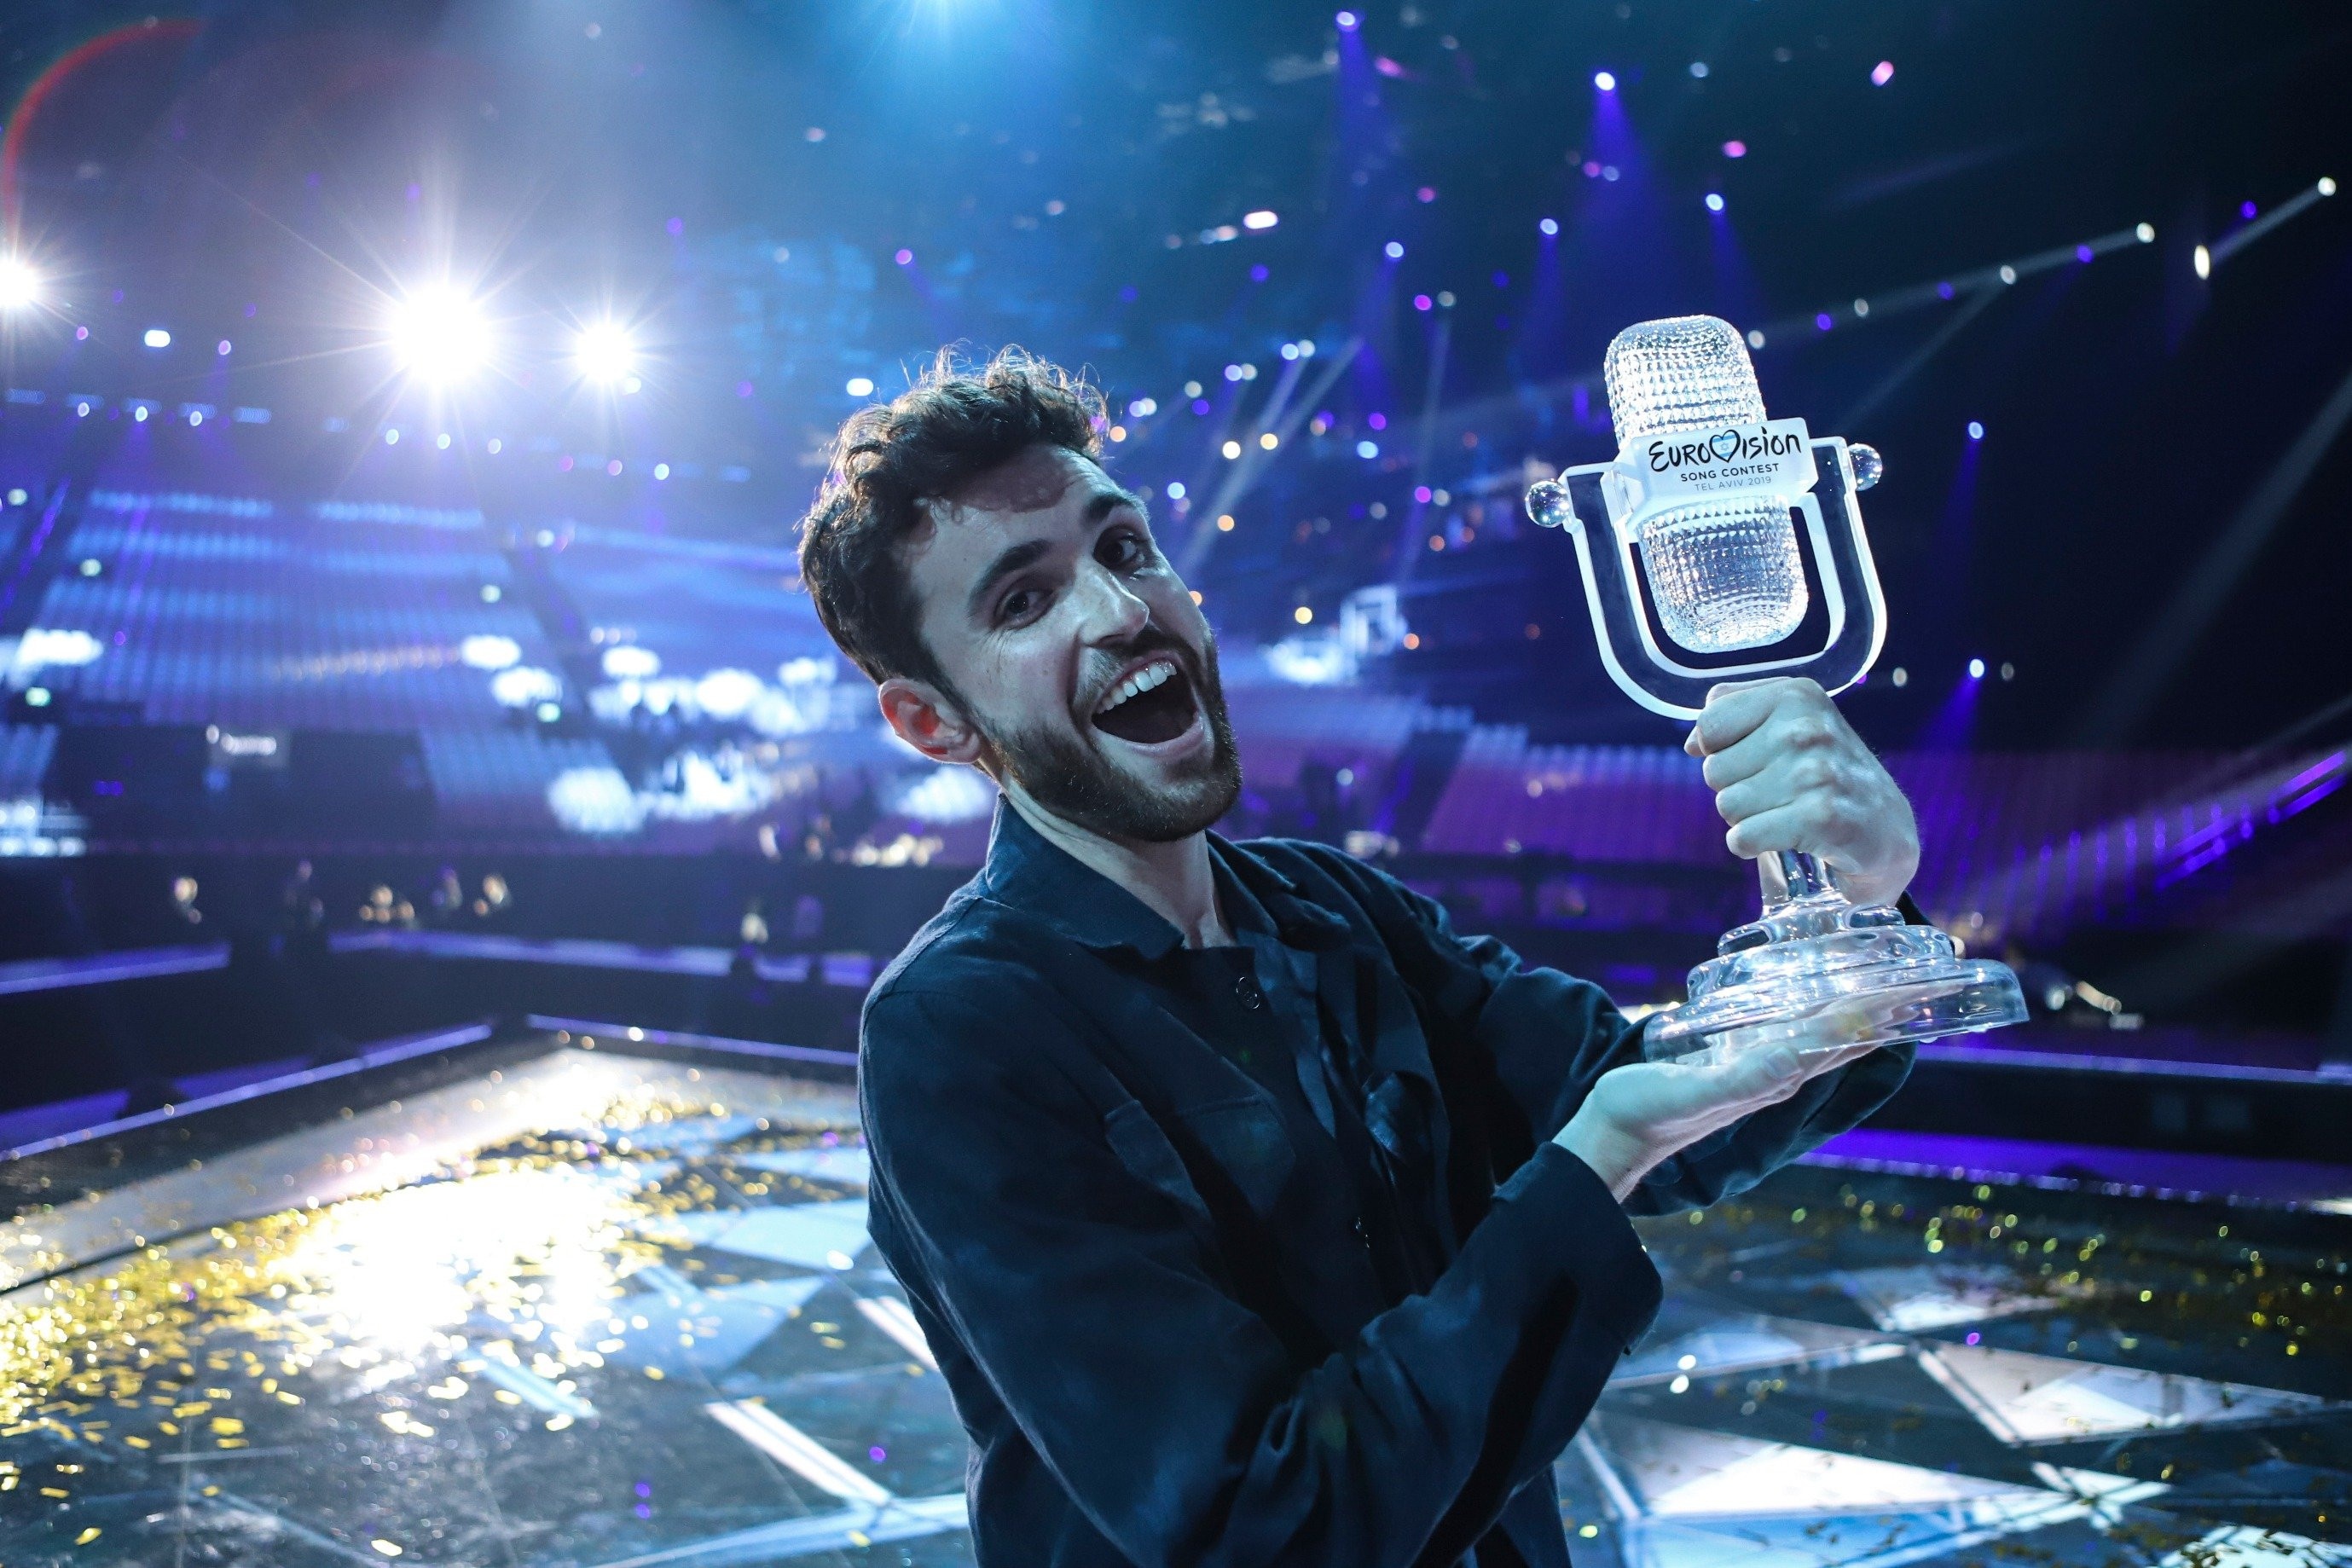 eurovision song contest, music, duncan laurence, eurovision